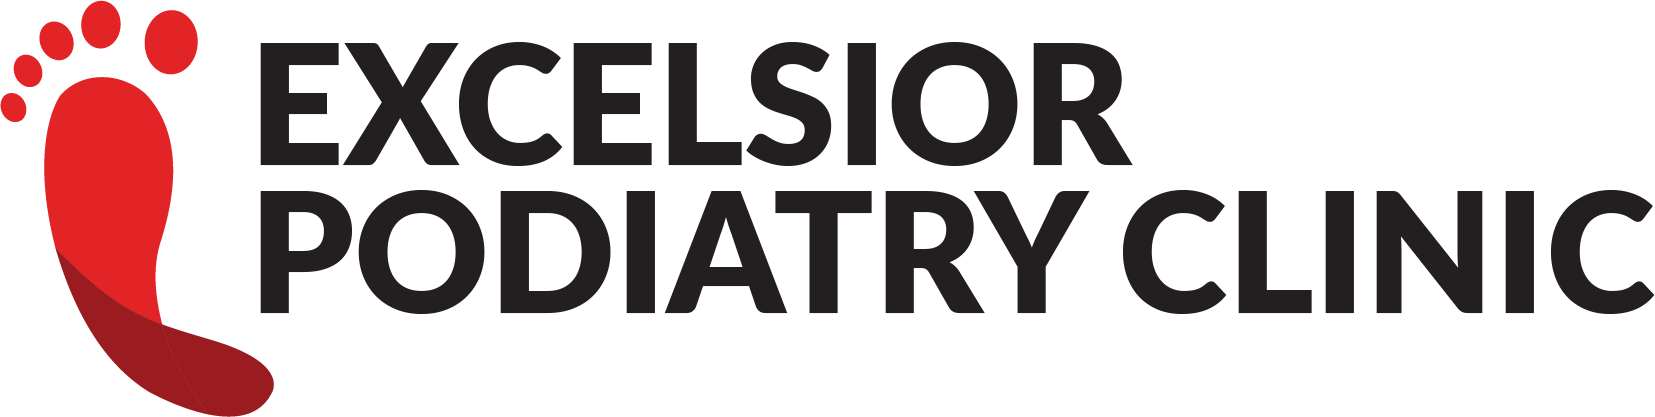 Excelsior Podiatary Clinic